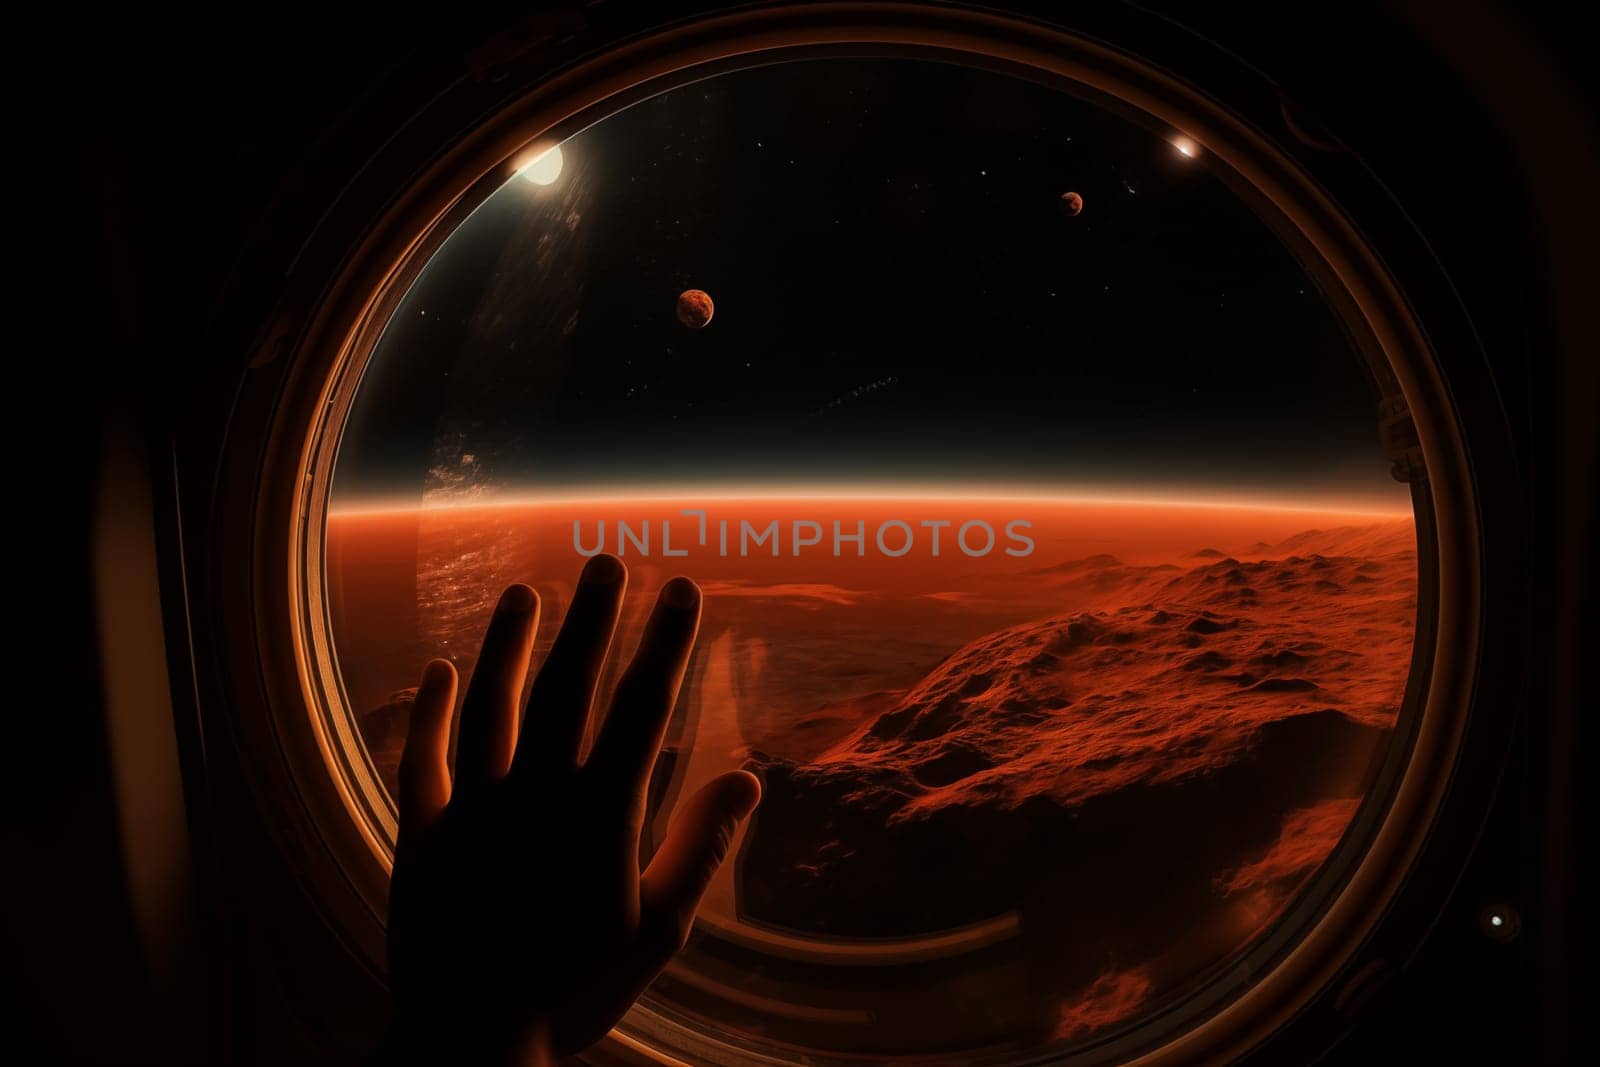 Mars landscape seen through spaceship window illuminator with astronaut hand touching the glass. Concept of extraterrestrial journey space exploration, conveys sense of otherworldly beauty and wonder